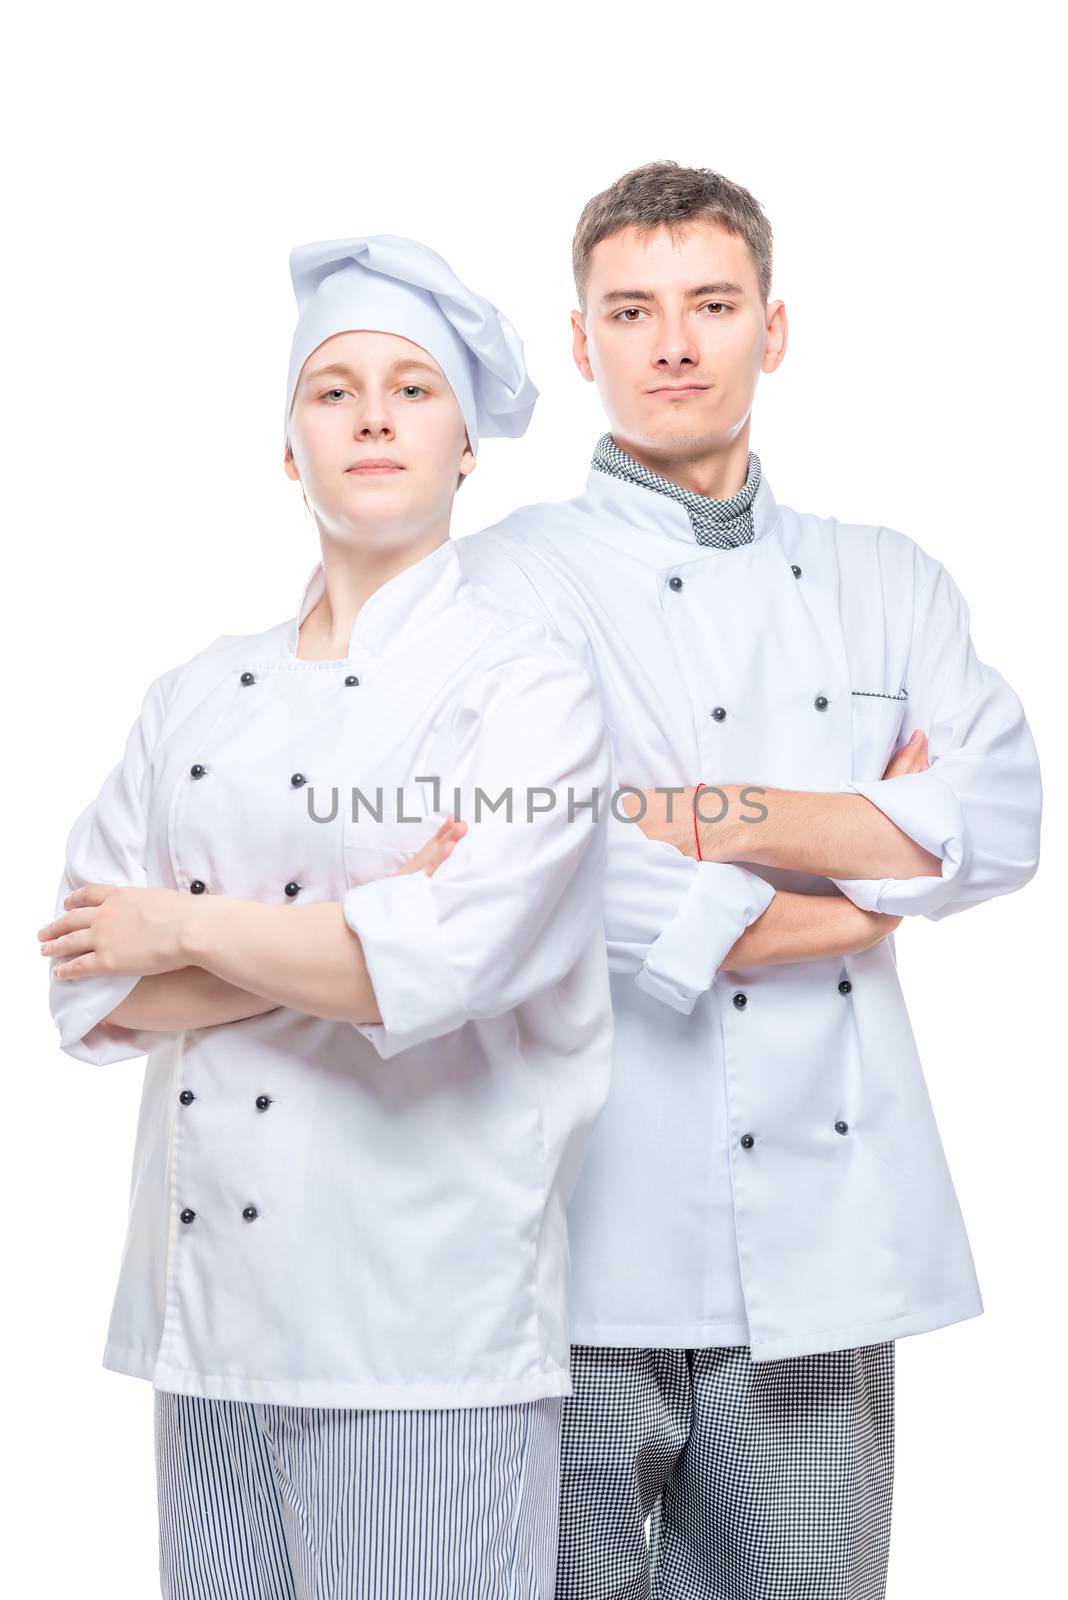 portrait of a successful team of professional chefs in suits aga by kosmsos111